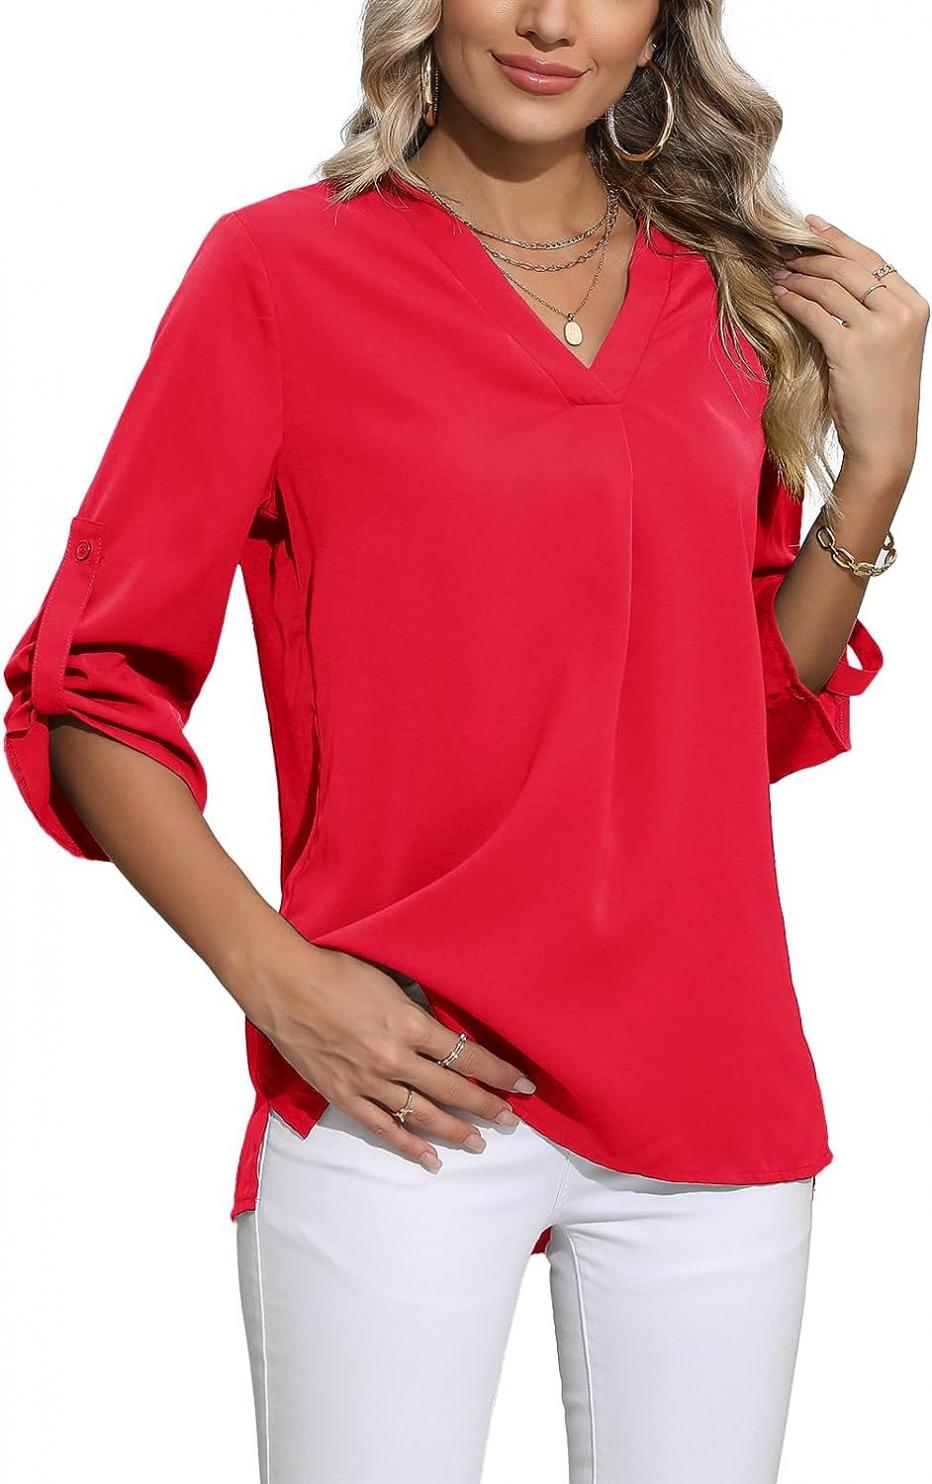 SUEANI Women's Chiffon Blouse 3/4 Cuffed Sleeve V Neck Pleated Front Summer Casual Work Shirt